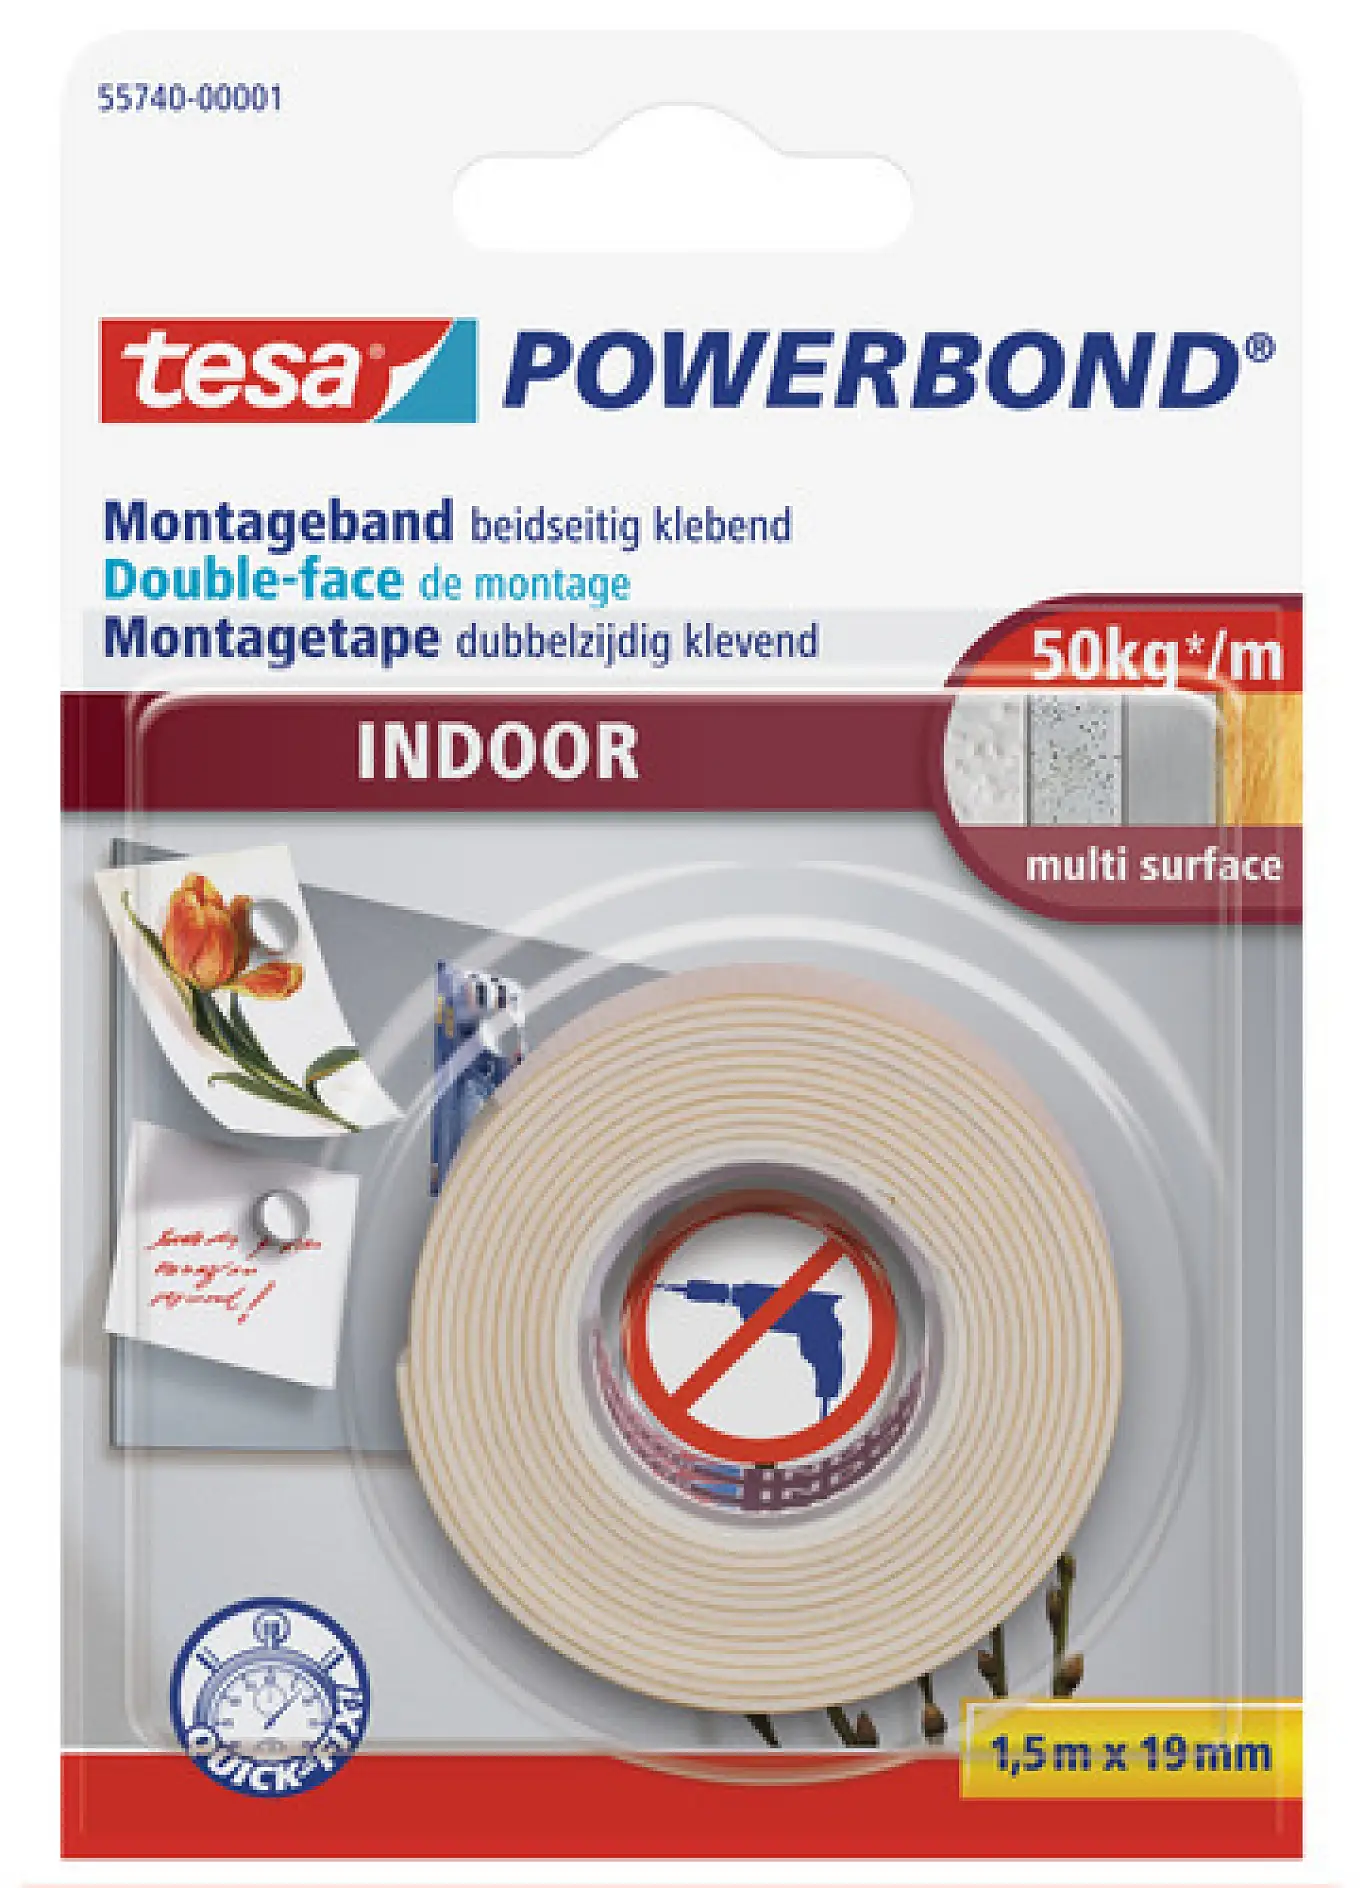 tesa® Powerbond Indoor is a double-sided self-adhesive mounting tape which can be used for a wide range of household jobs. It securely fixes flat objects, with a thickness of up to 10 mm, to surfaces. In good bonding conditions, a strip of 10 cm of this heavy-duty fixing tape is enough to hold a weight of up to 5 kg. You can use it on any flat surface including textures such as tiles, wooden panels and most plastics. So hang things the easy way. Use tesa® Powerbond Indoor and forget about nails, screws and the need to drill holes.
